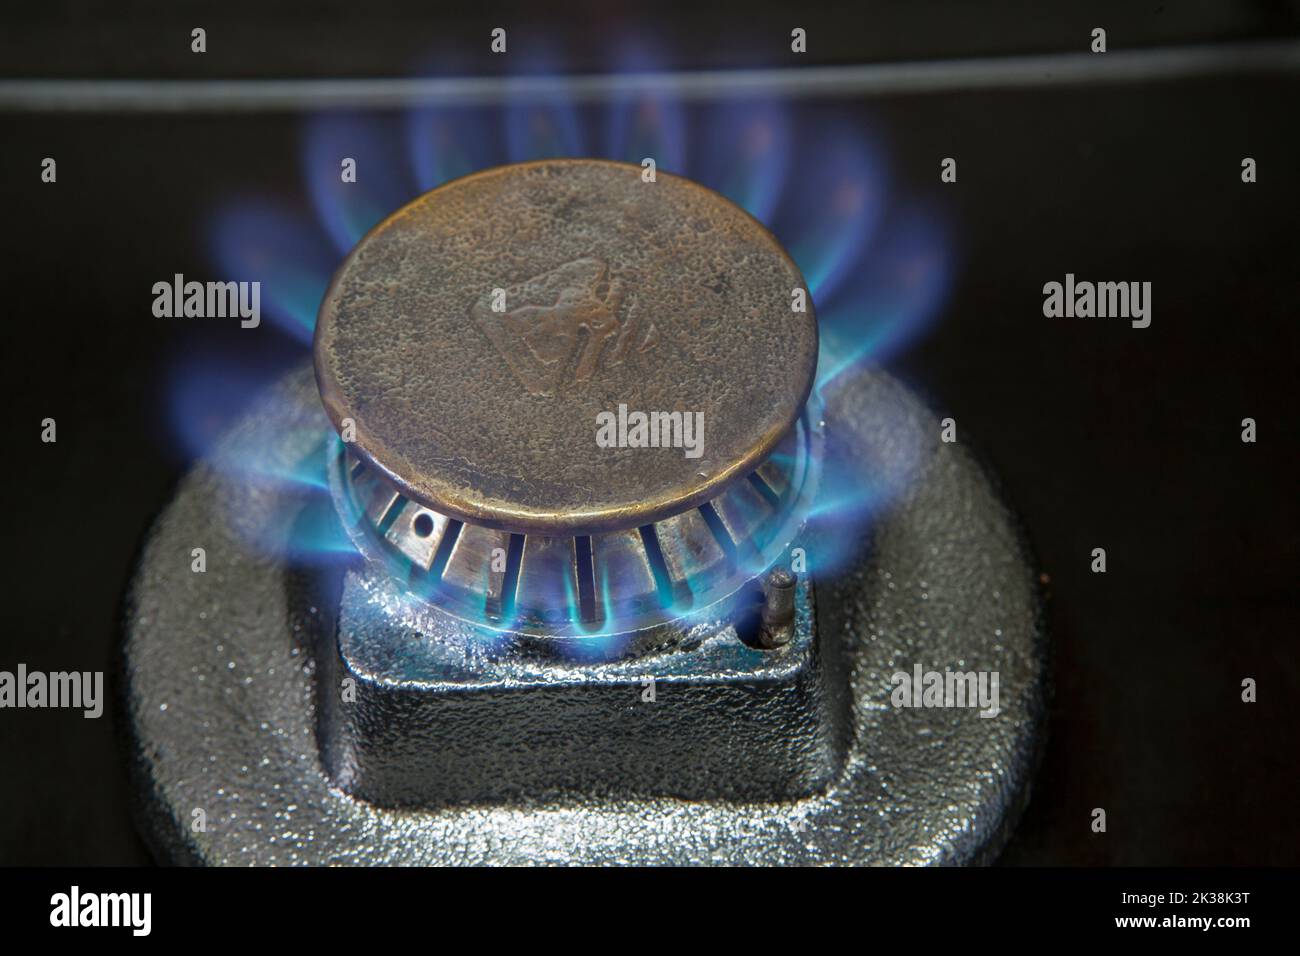 Flame on a gas cooker Stock Photo